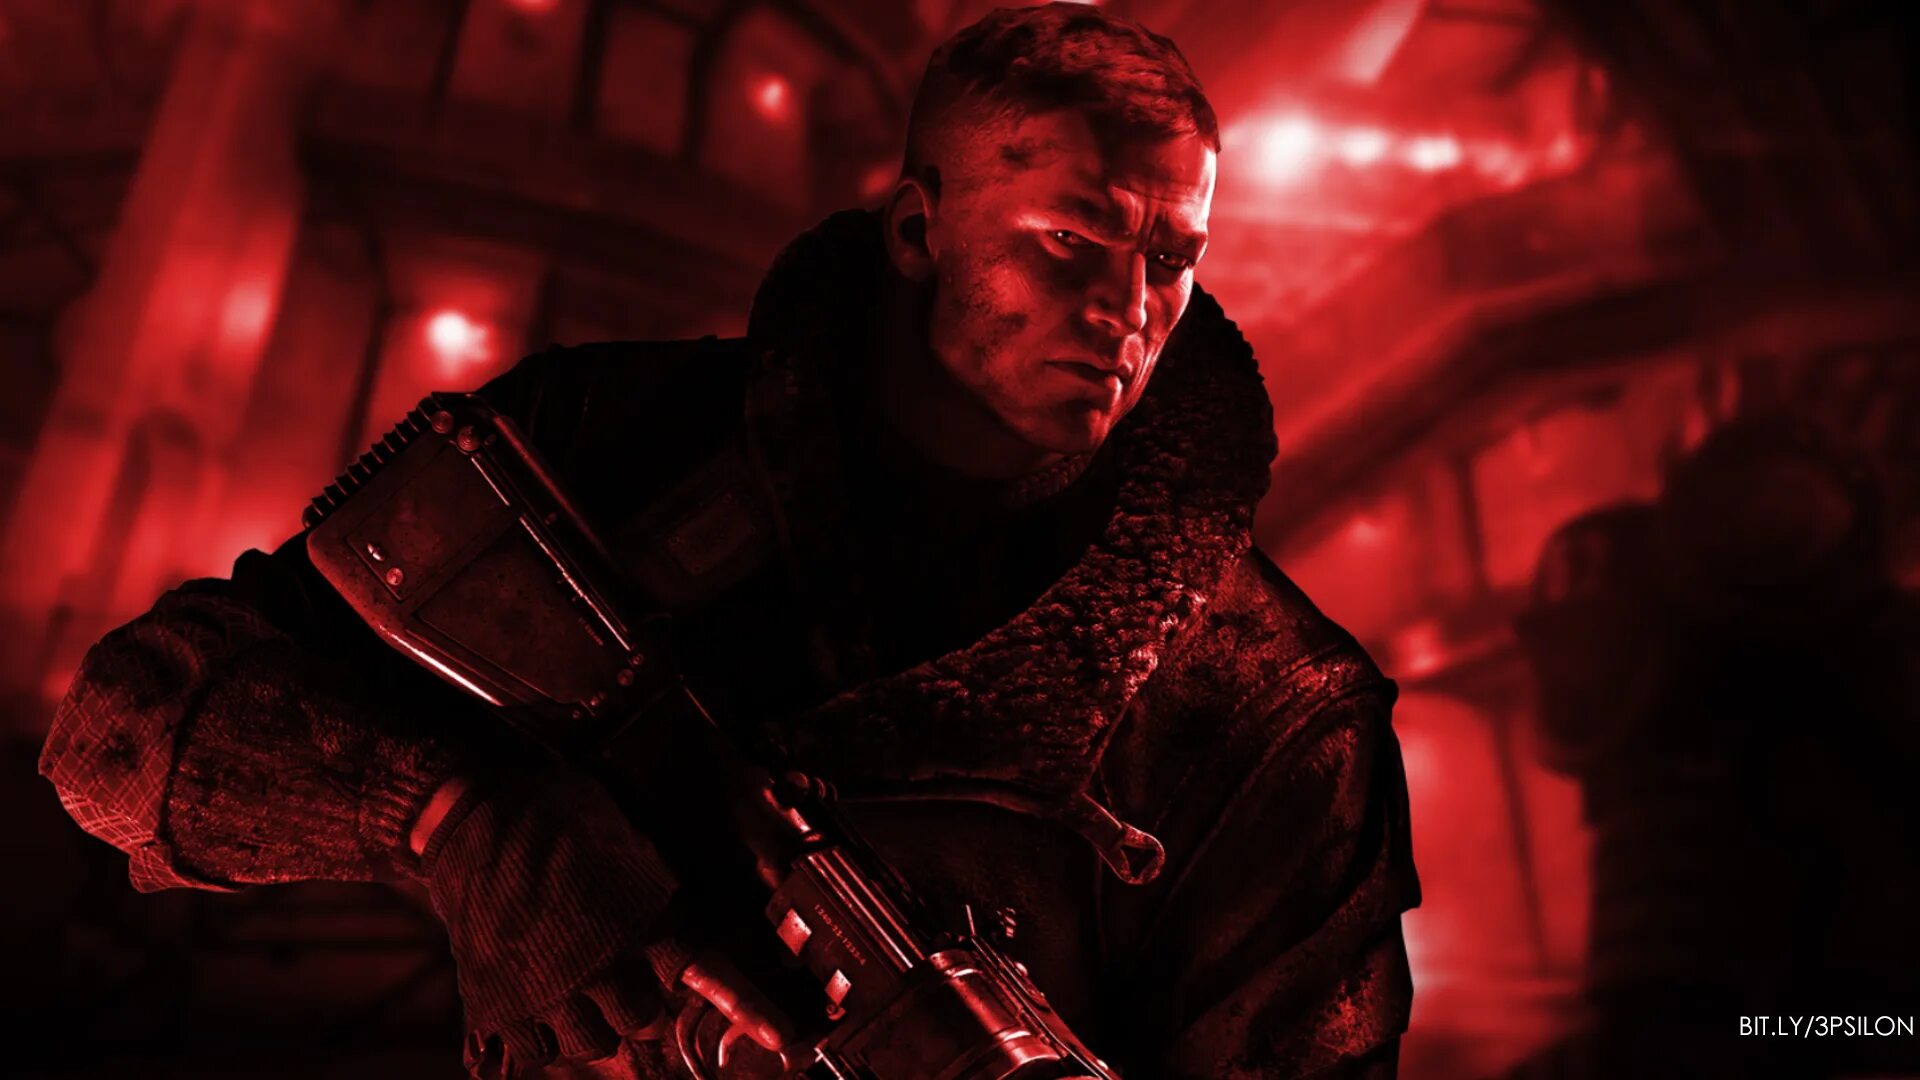 The new order 2014. Wolfenstein: the New order. Wolfenstein the New order 2. Wjifensrein..MHE New orde. Вольфенштайн the New order.